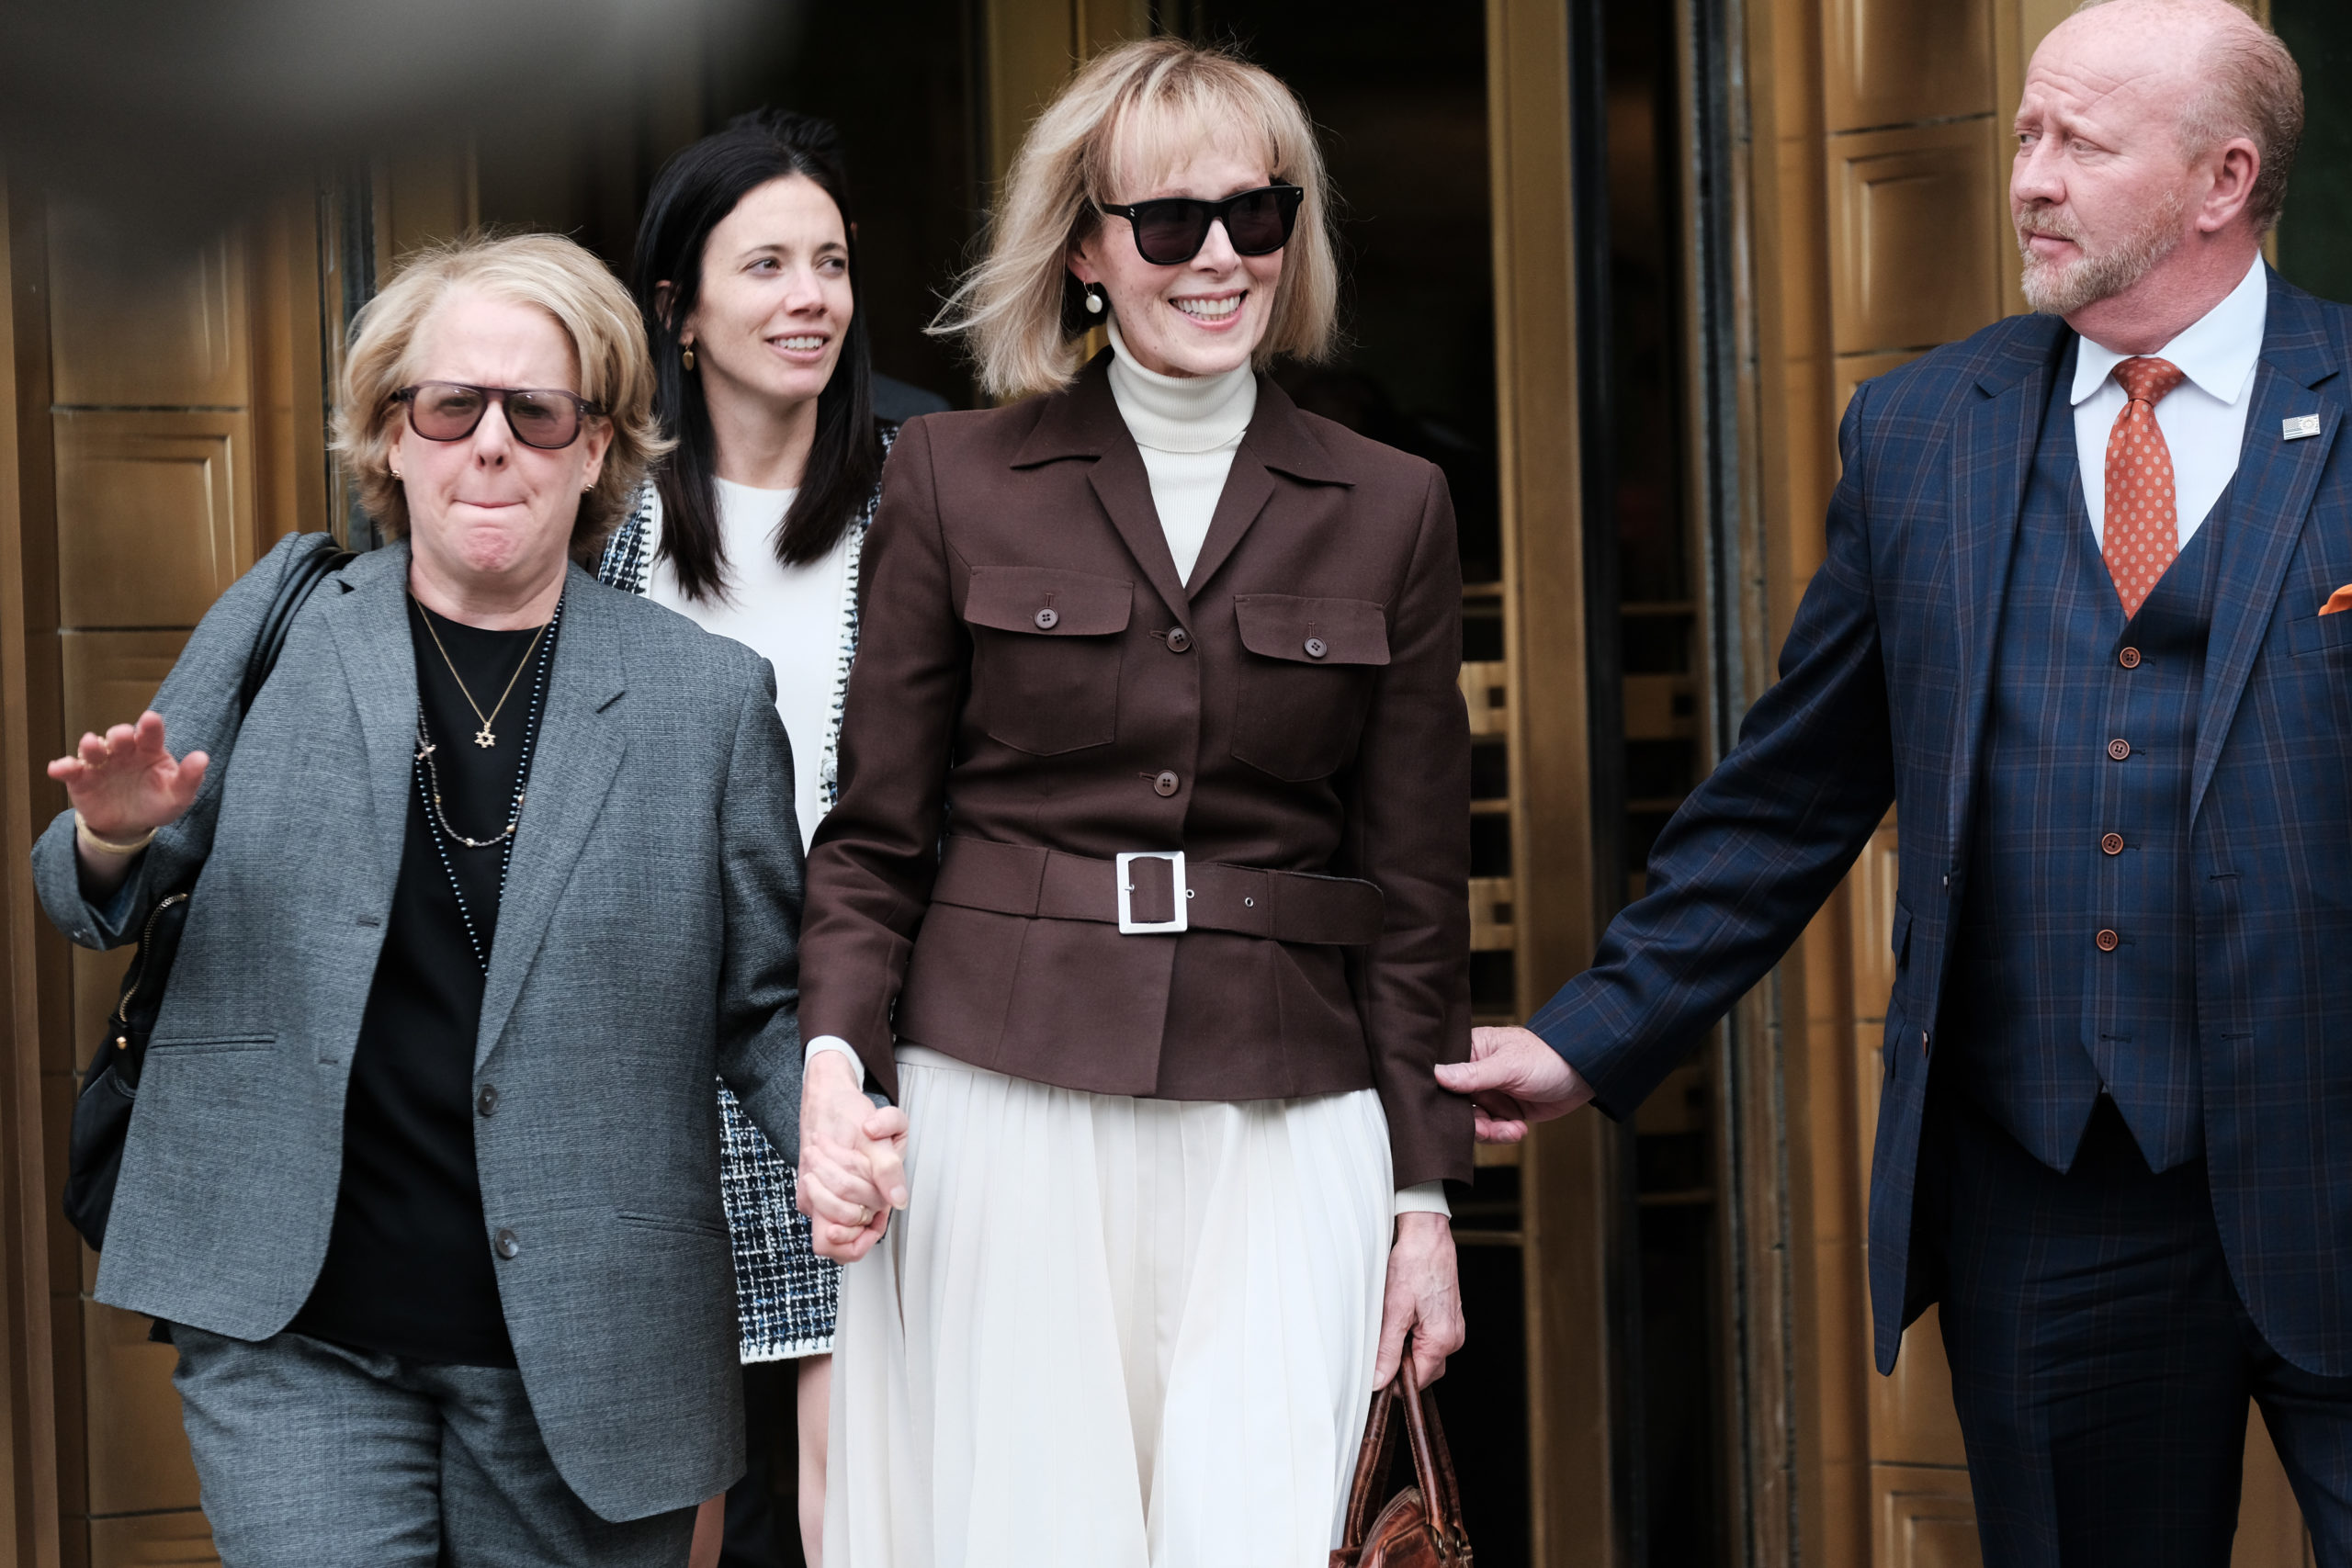 NEW YORK, NEW YORK - MAY 09: Writer E. Jean Carroll leaves a Manhattan court house after a jury found former President Donald Trump liable for sexually abusing her in a Manhattan department store in the 1990's on May 09, 2023 in New York City. (Photo by Spencer Platt/Getty Images)